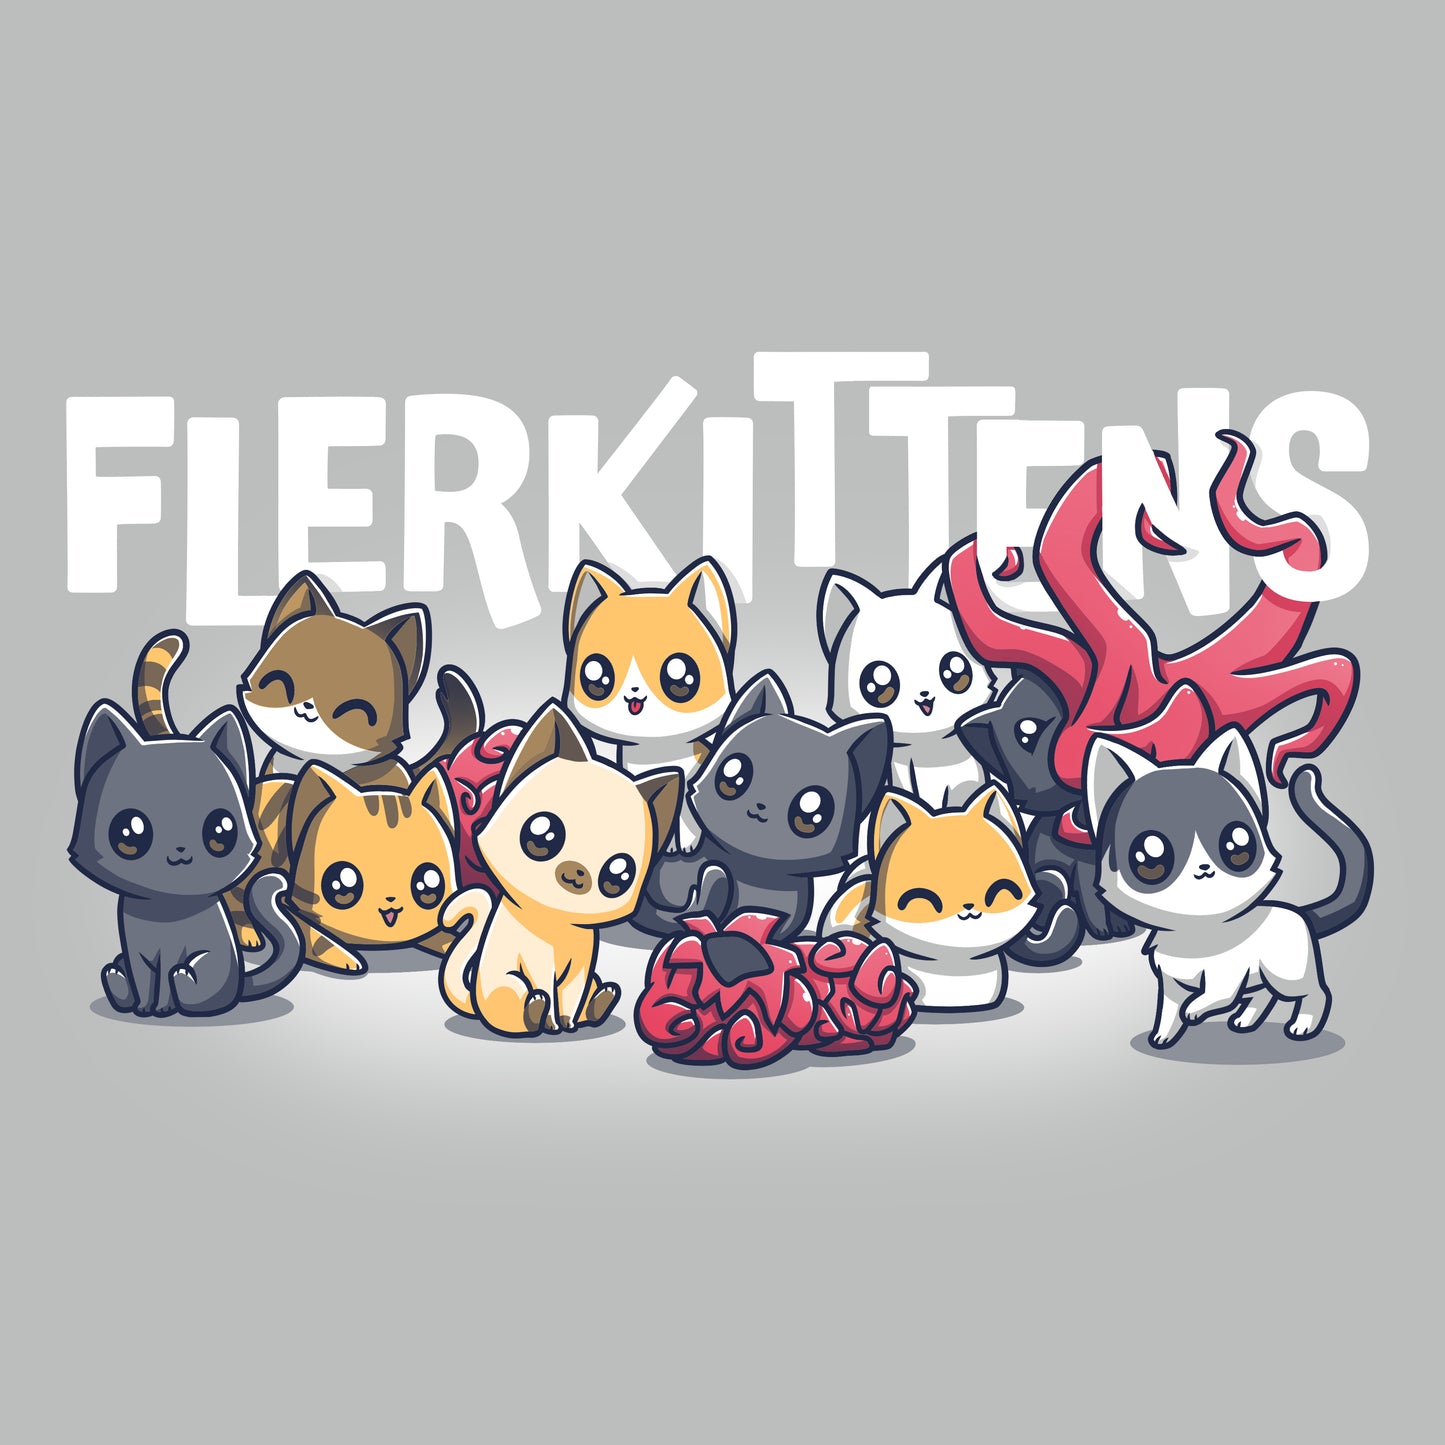 An officially licensed The Marvels T-shirt featuring a group of Flerkittens.